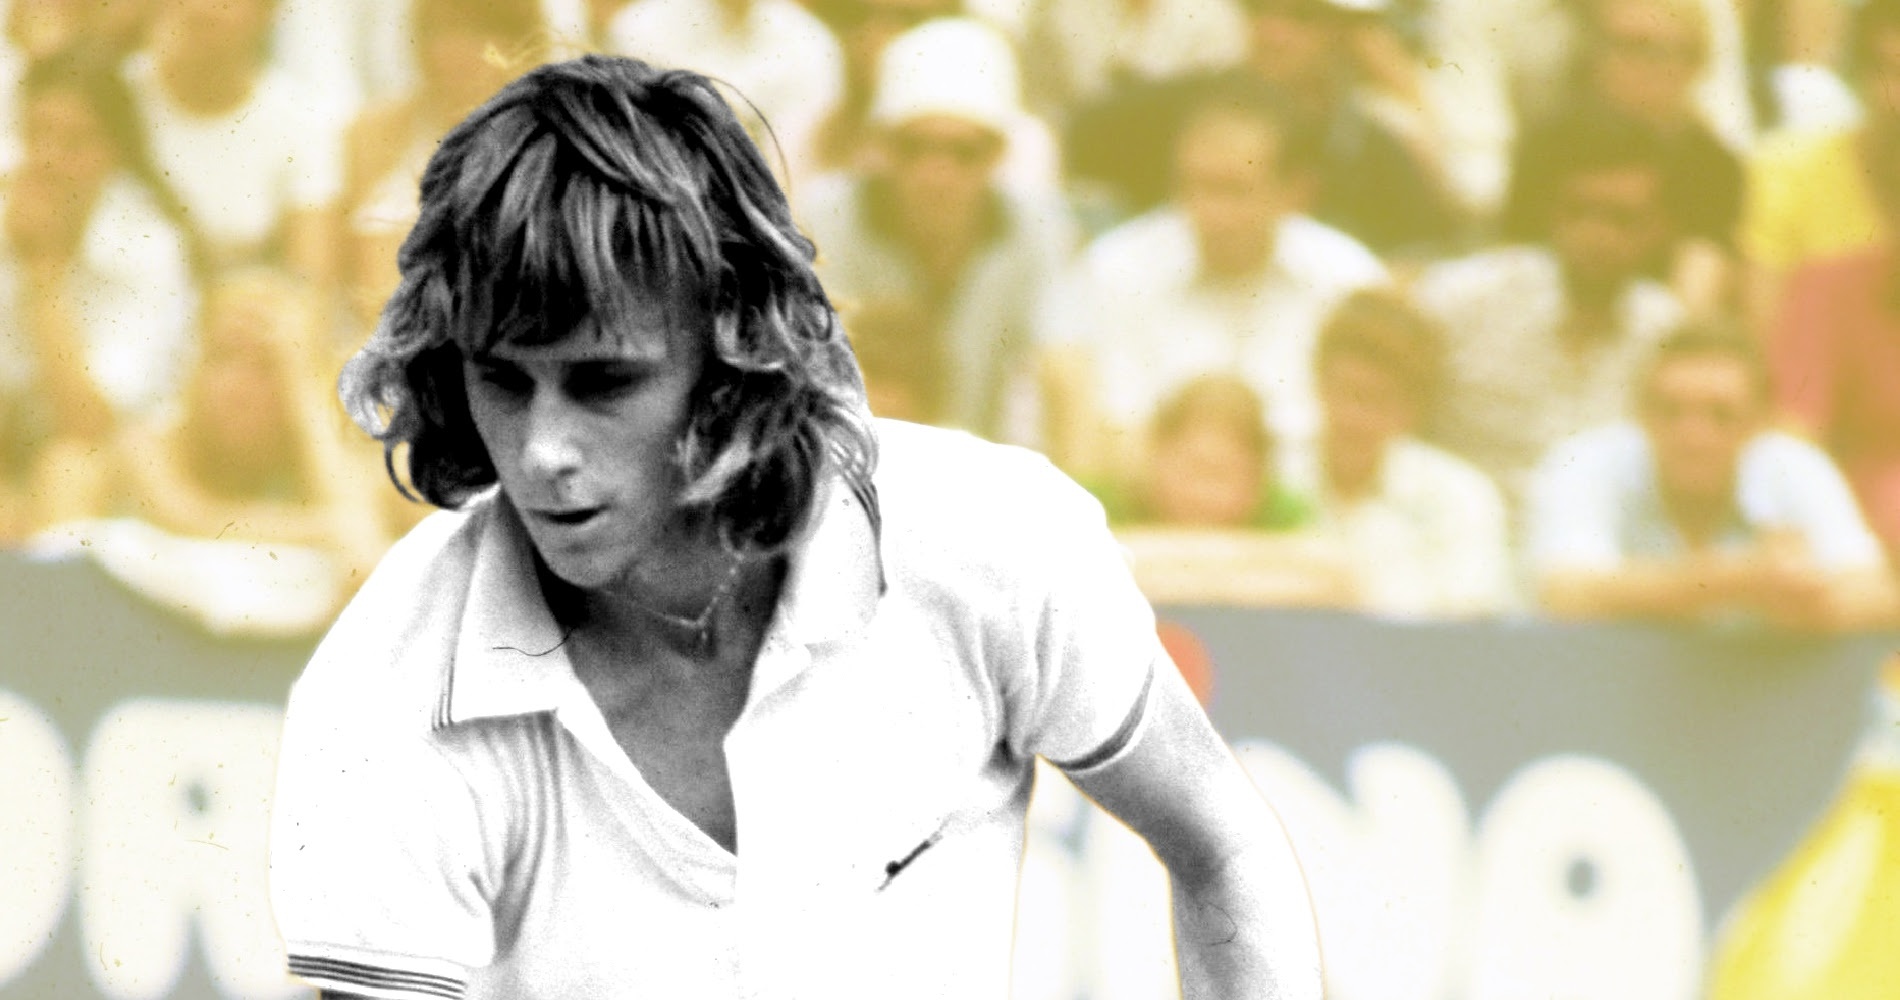 Bjorn Borg, On this day 21.12